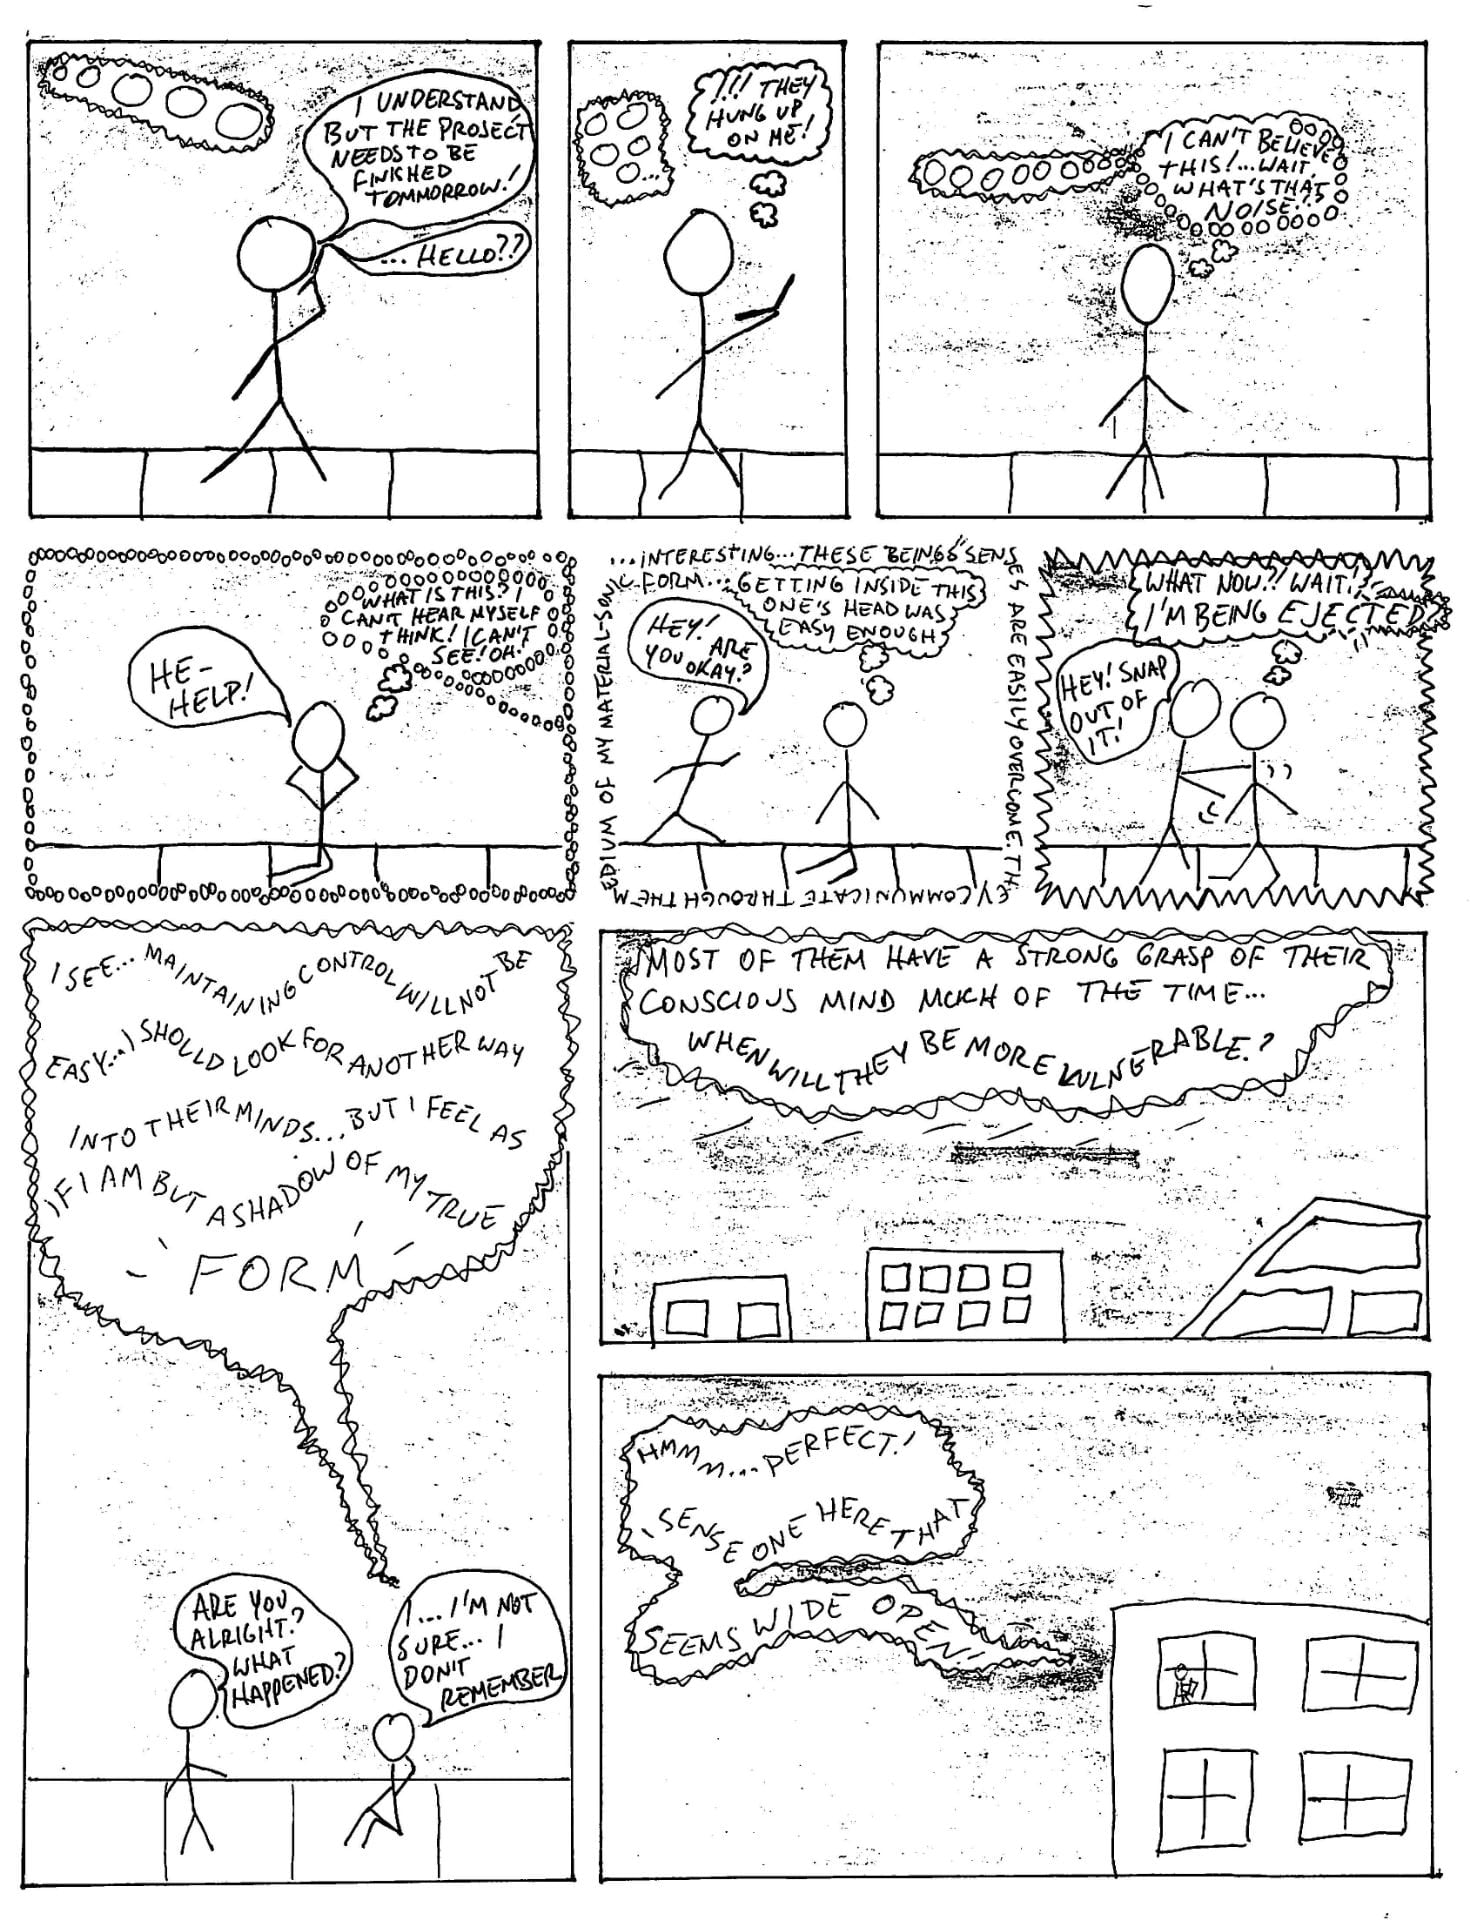 J. Heckethorn - Comic page 2 - We see the sound, which is more of a consciousness try to enter a mind, and is ejected because of the will of the person, and then sees an open one.